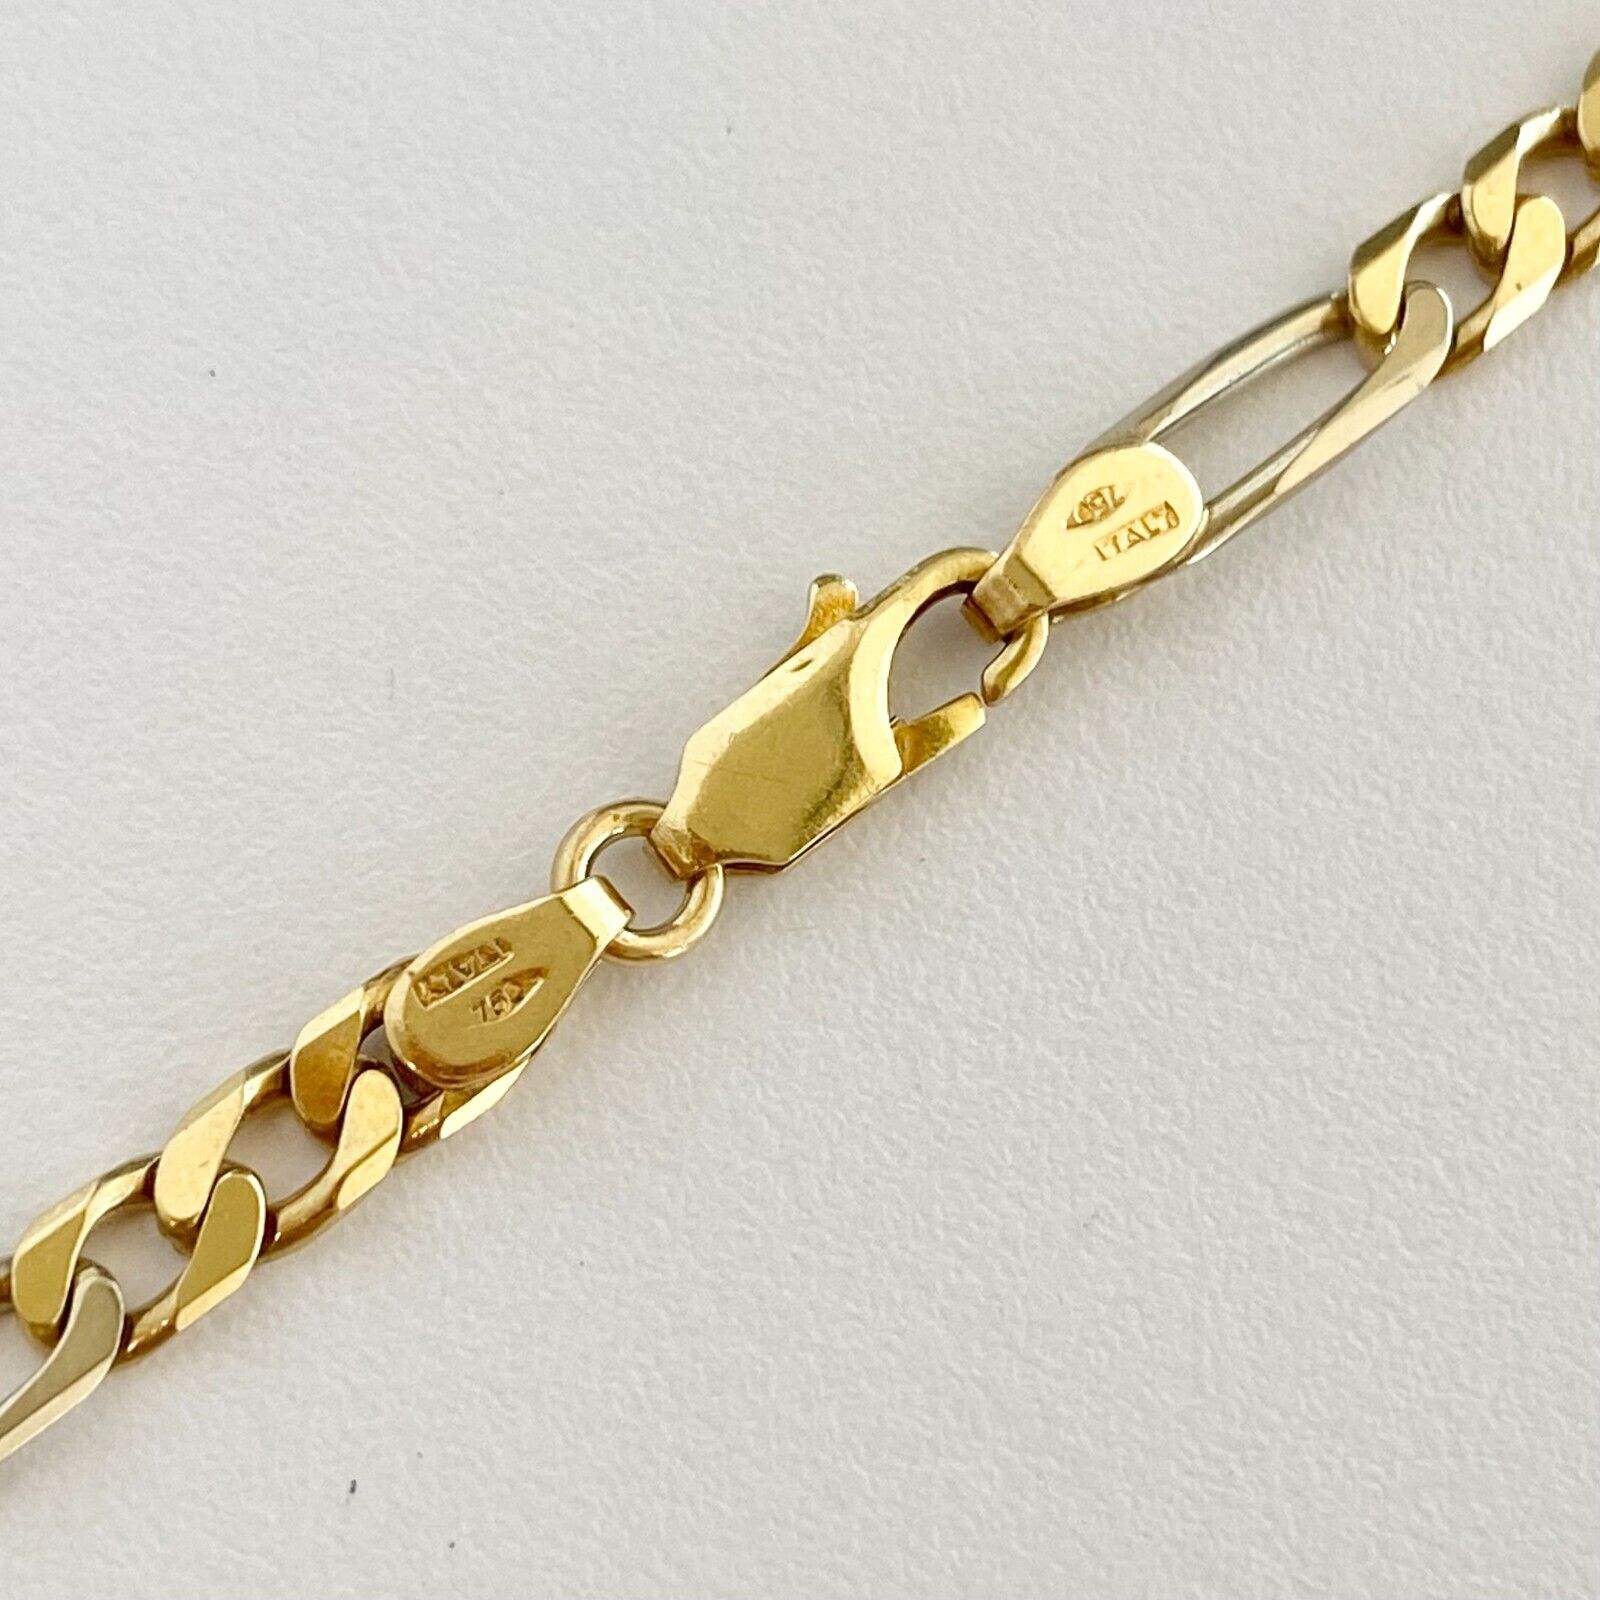 Figaro Chain Necklace in 18k 2 Tone Yellow and White Gold